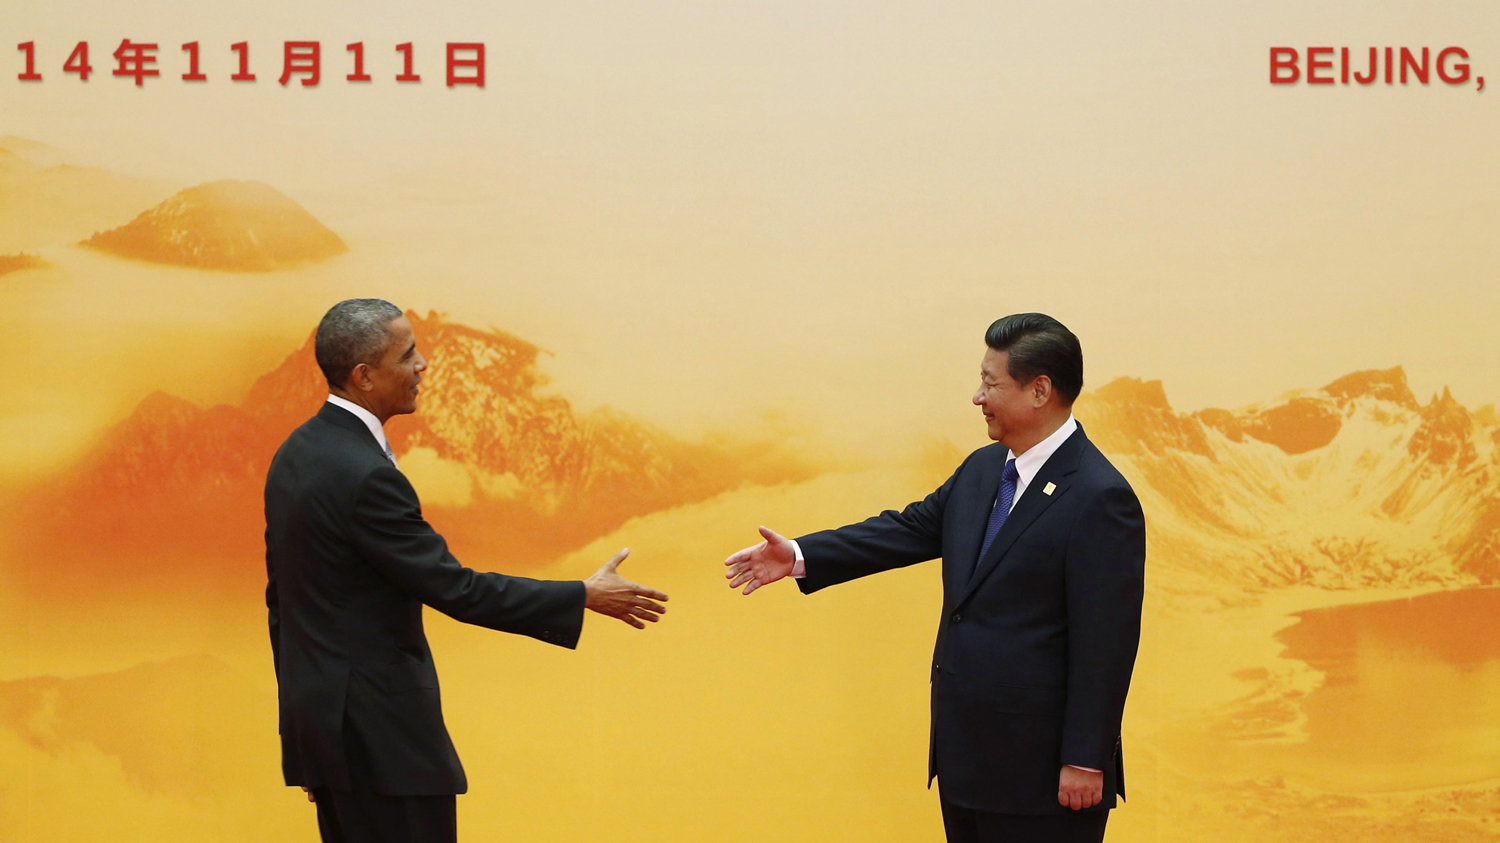 U.S. President Obama shakes hands with China's President Xi during the APEC forum, at the International Convention Center in Beijing